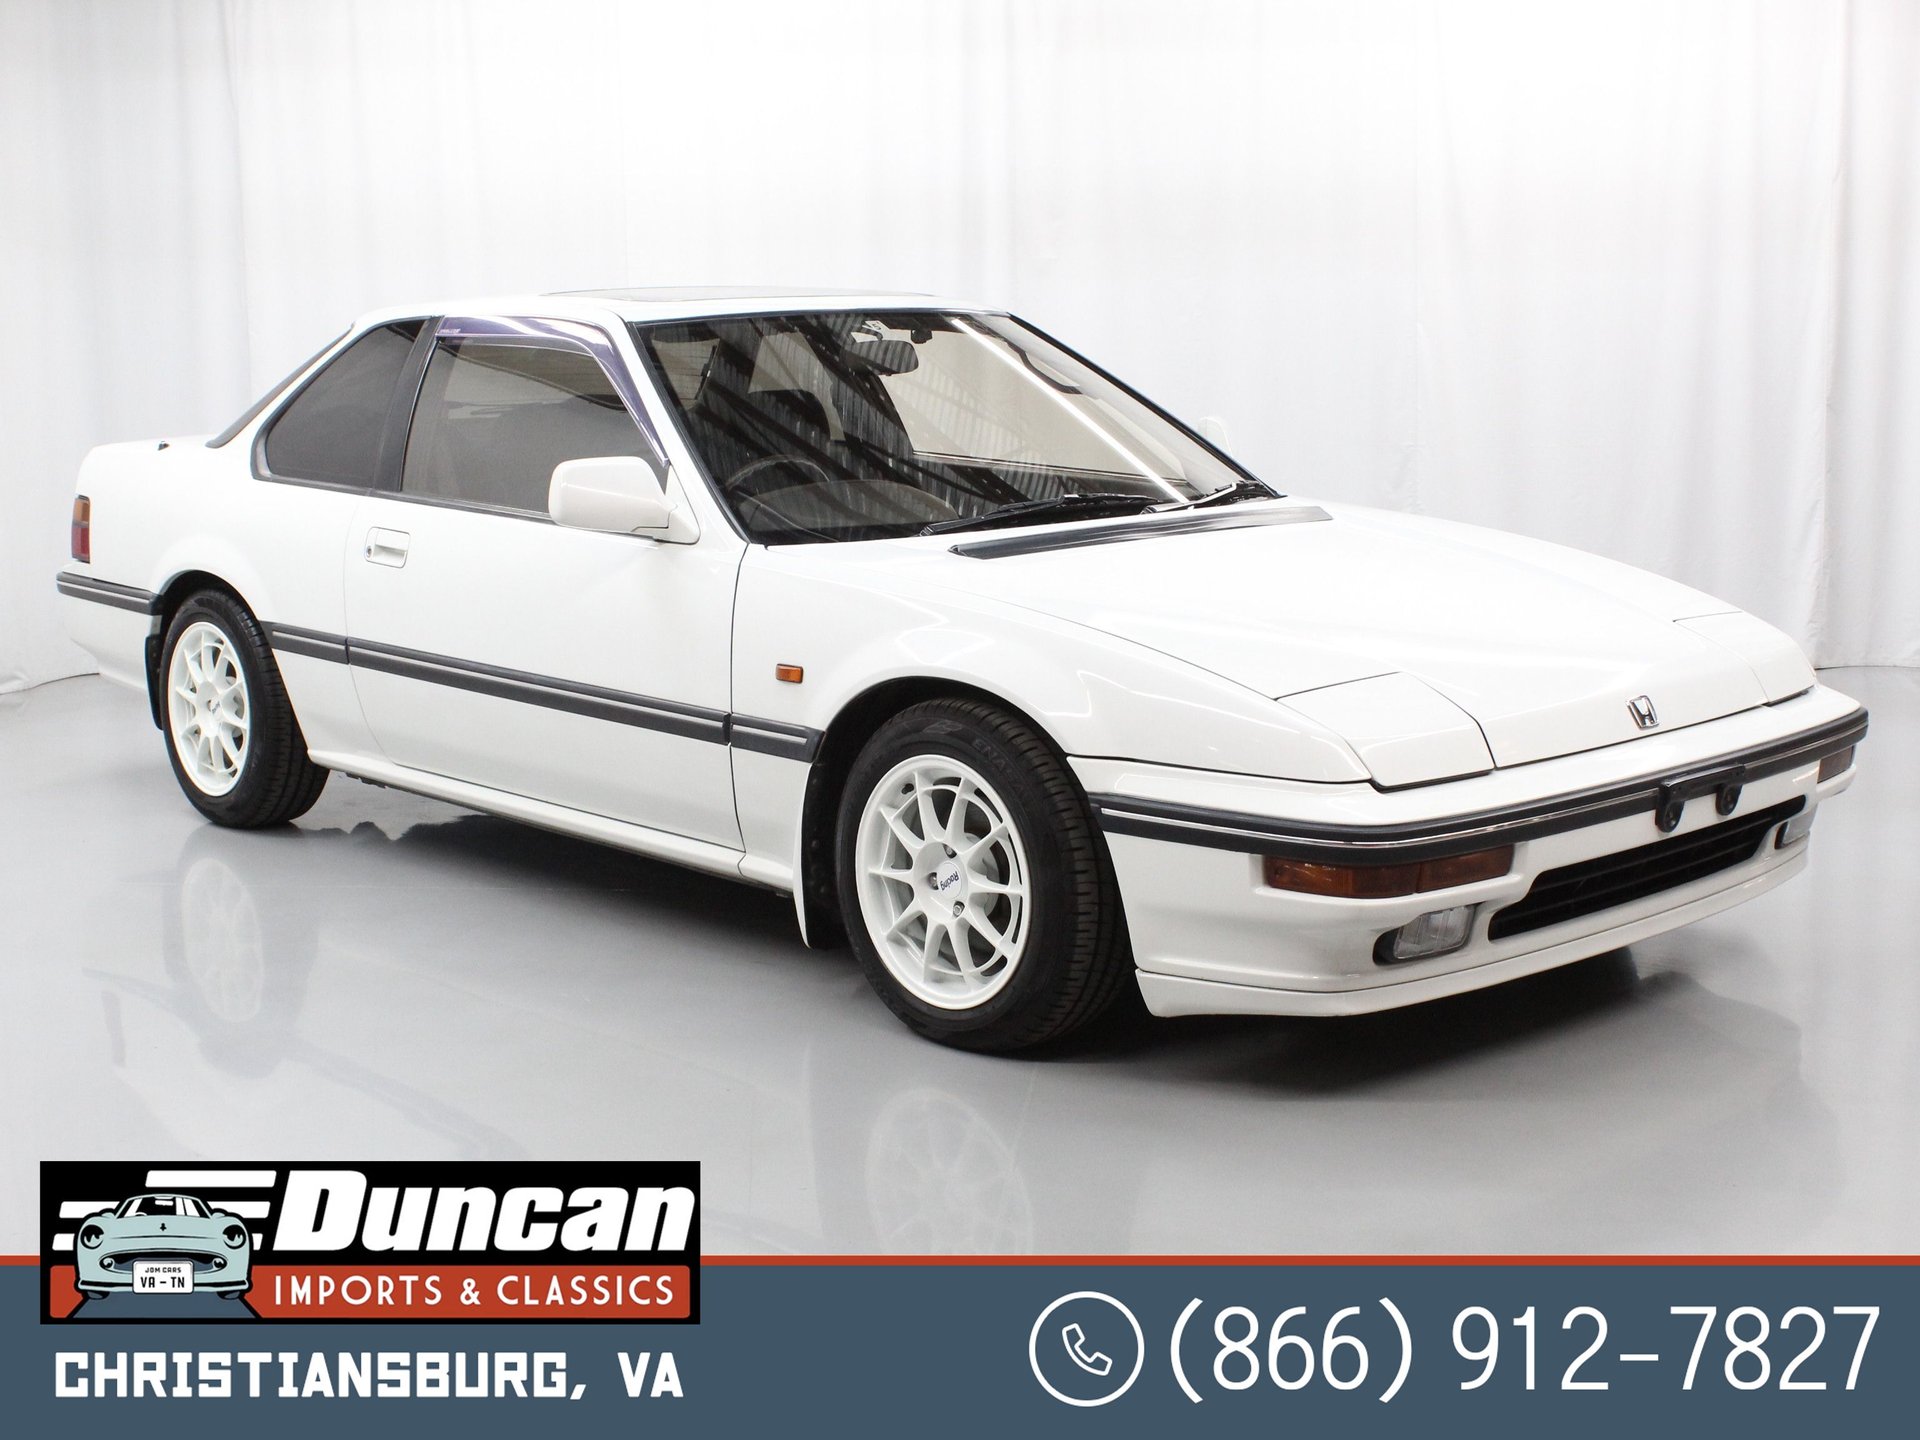 1988 Honda Prelude Si for sale #213849 | Motorious